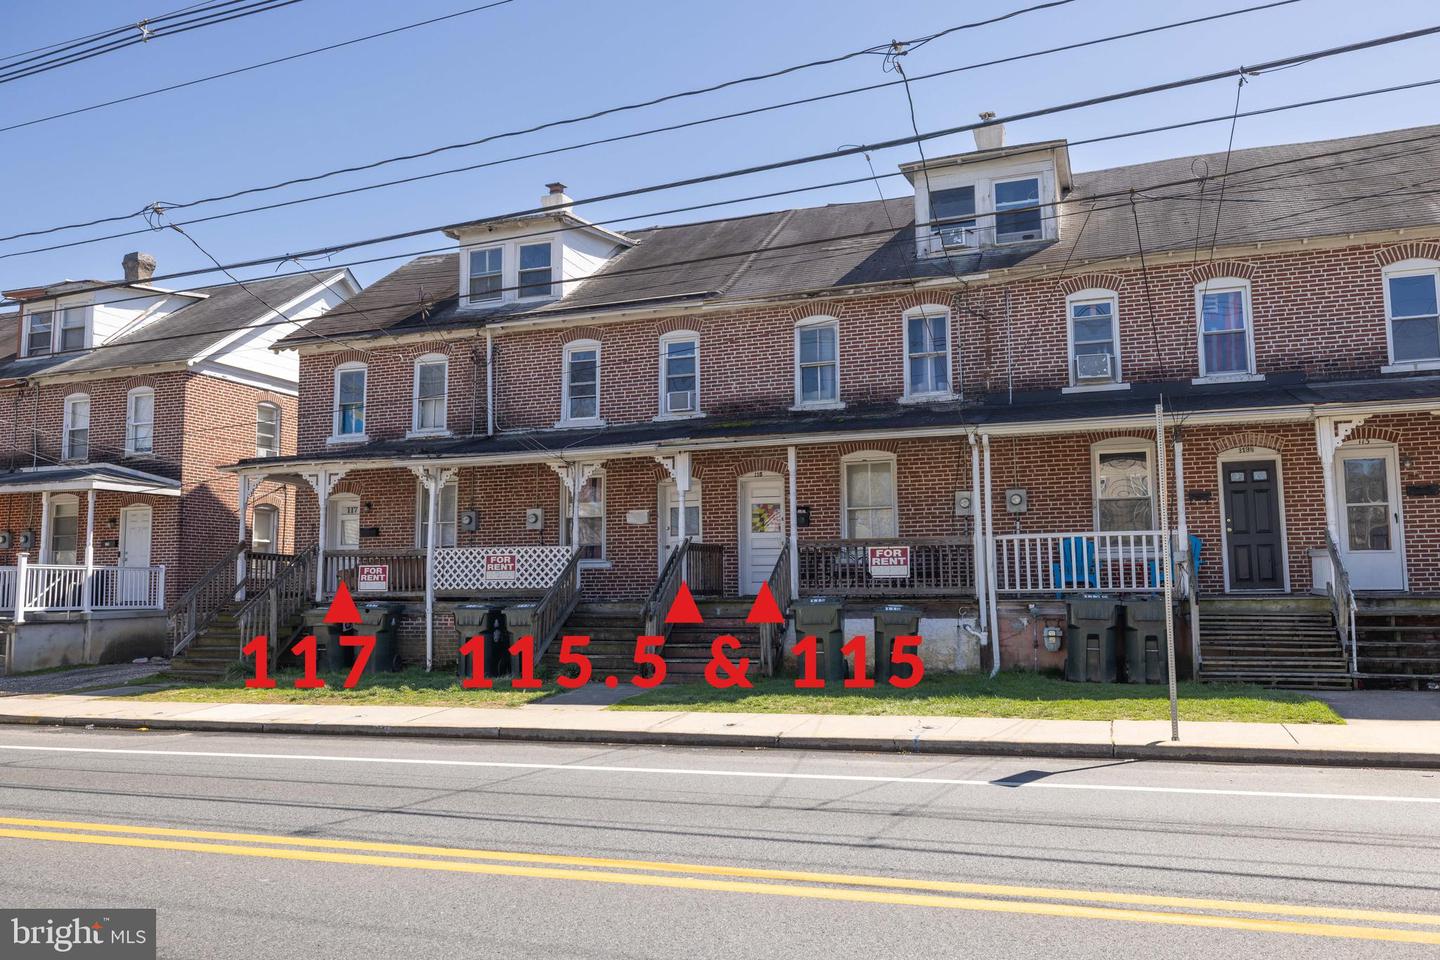 115 E Cleveland Ave   - Best of Northern Virginia Real Estate